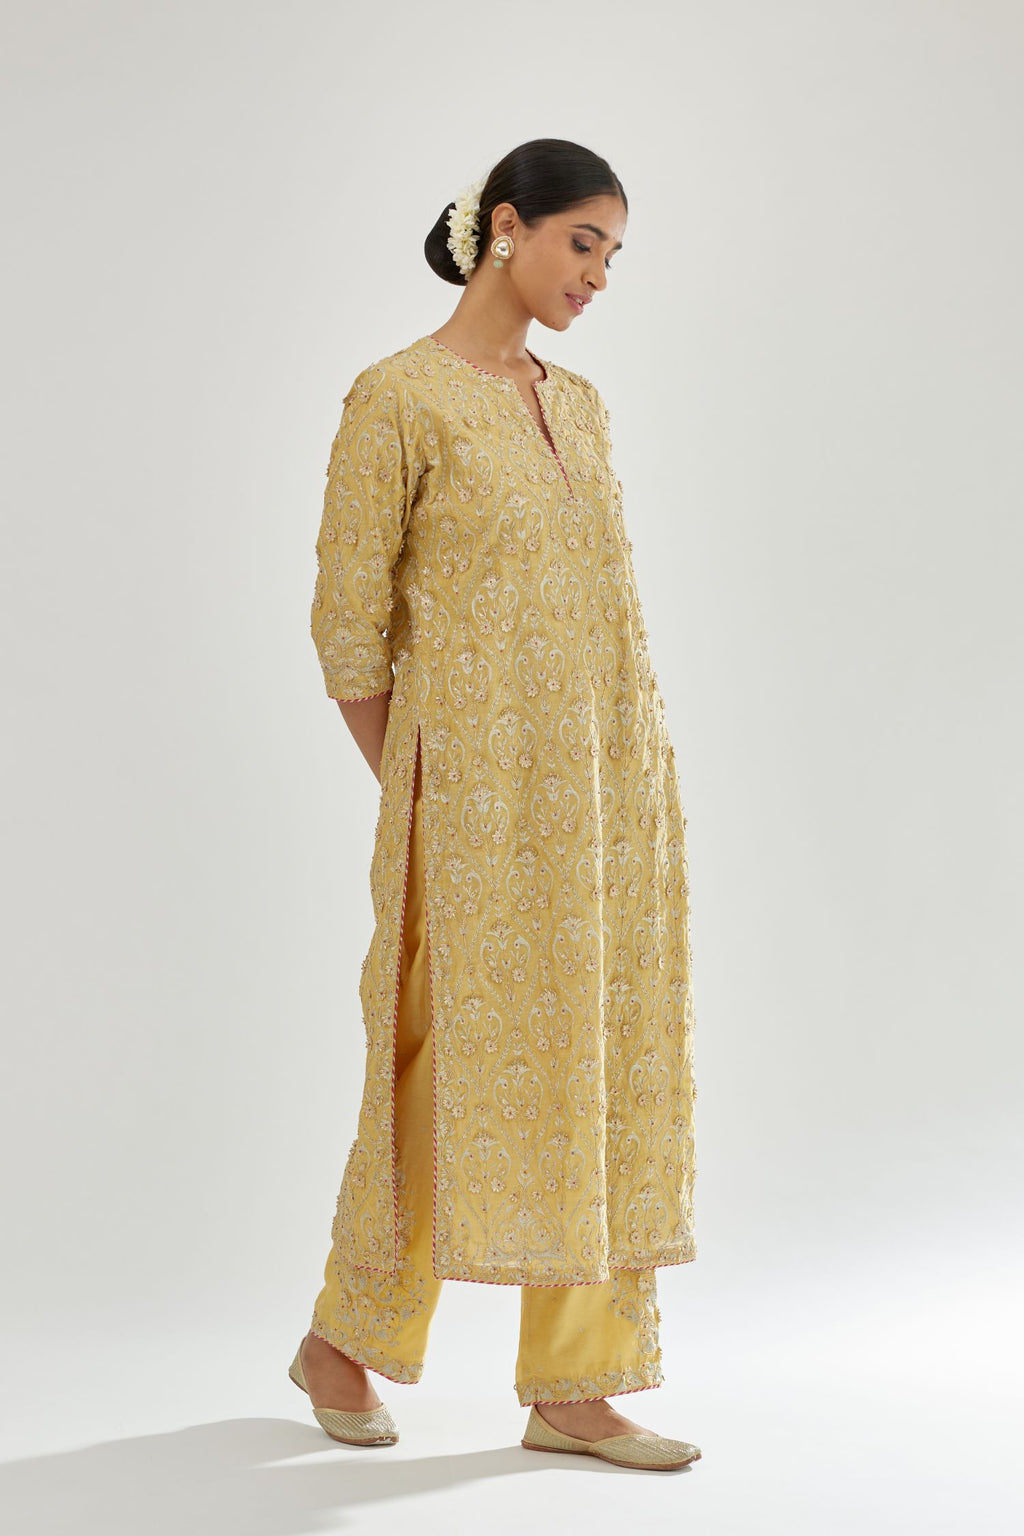 Yellow silk chanderi straight kurta set with all-over dori and gota jaal embroidery, highlighted with contrast bead work.